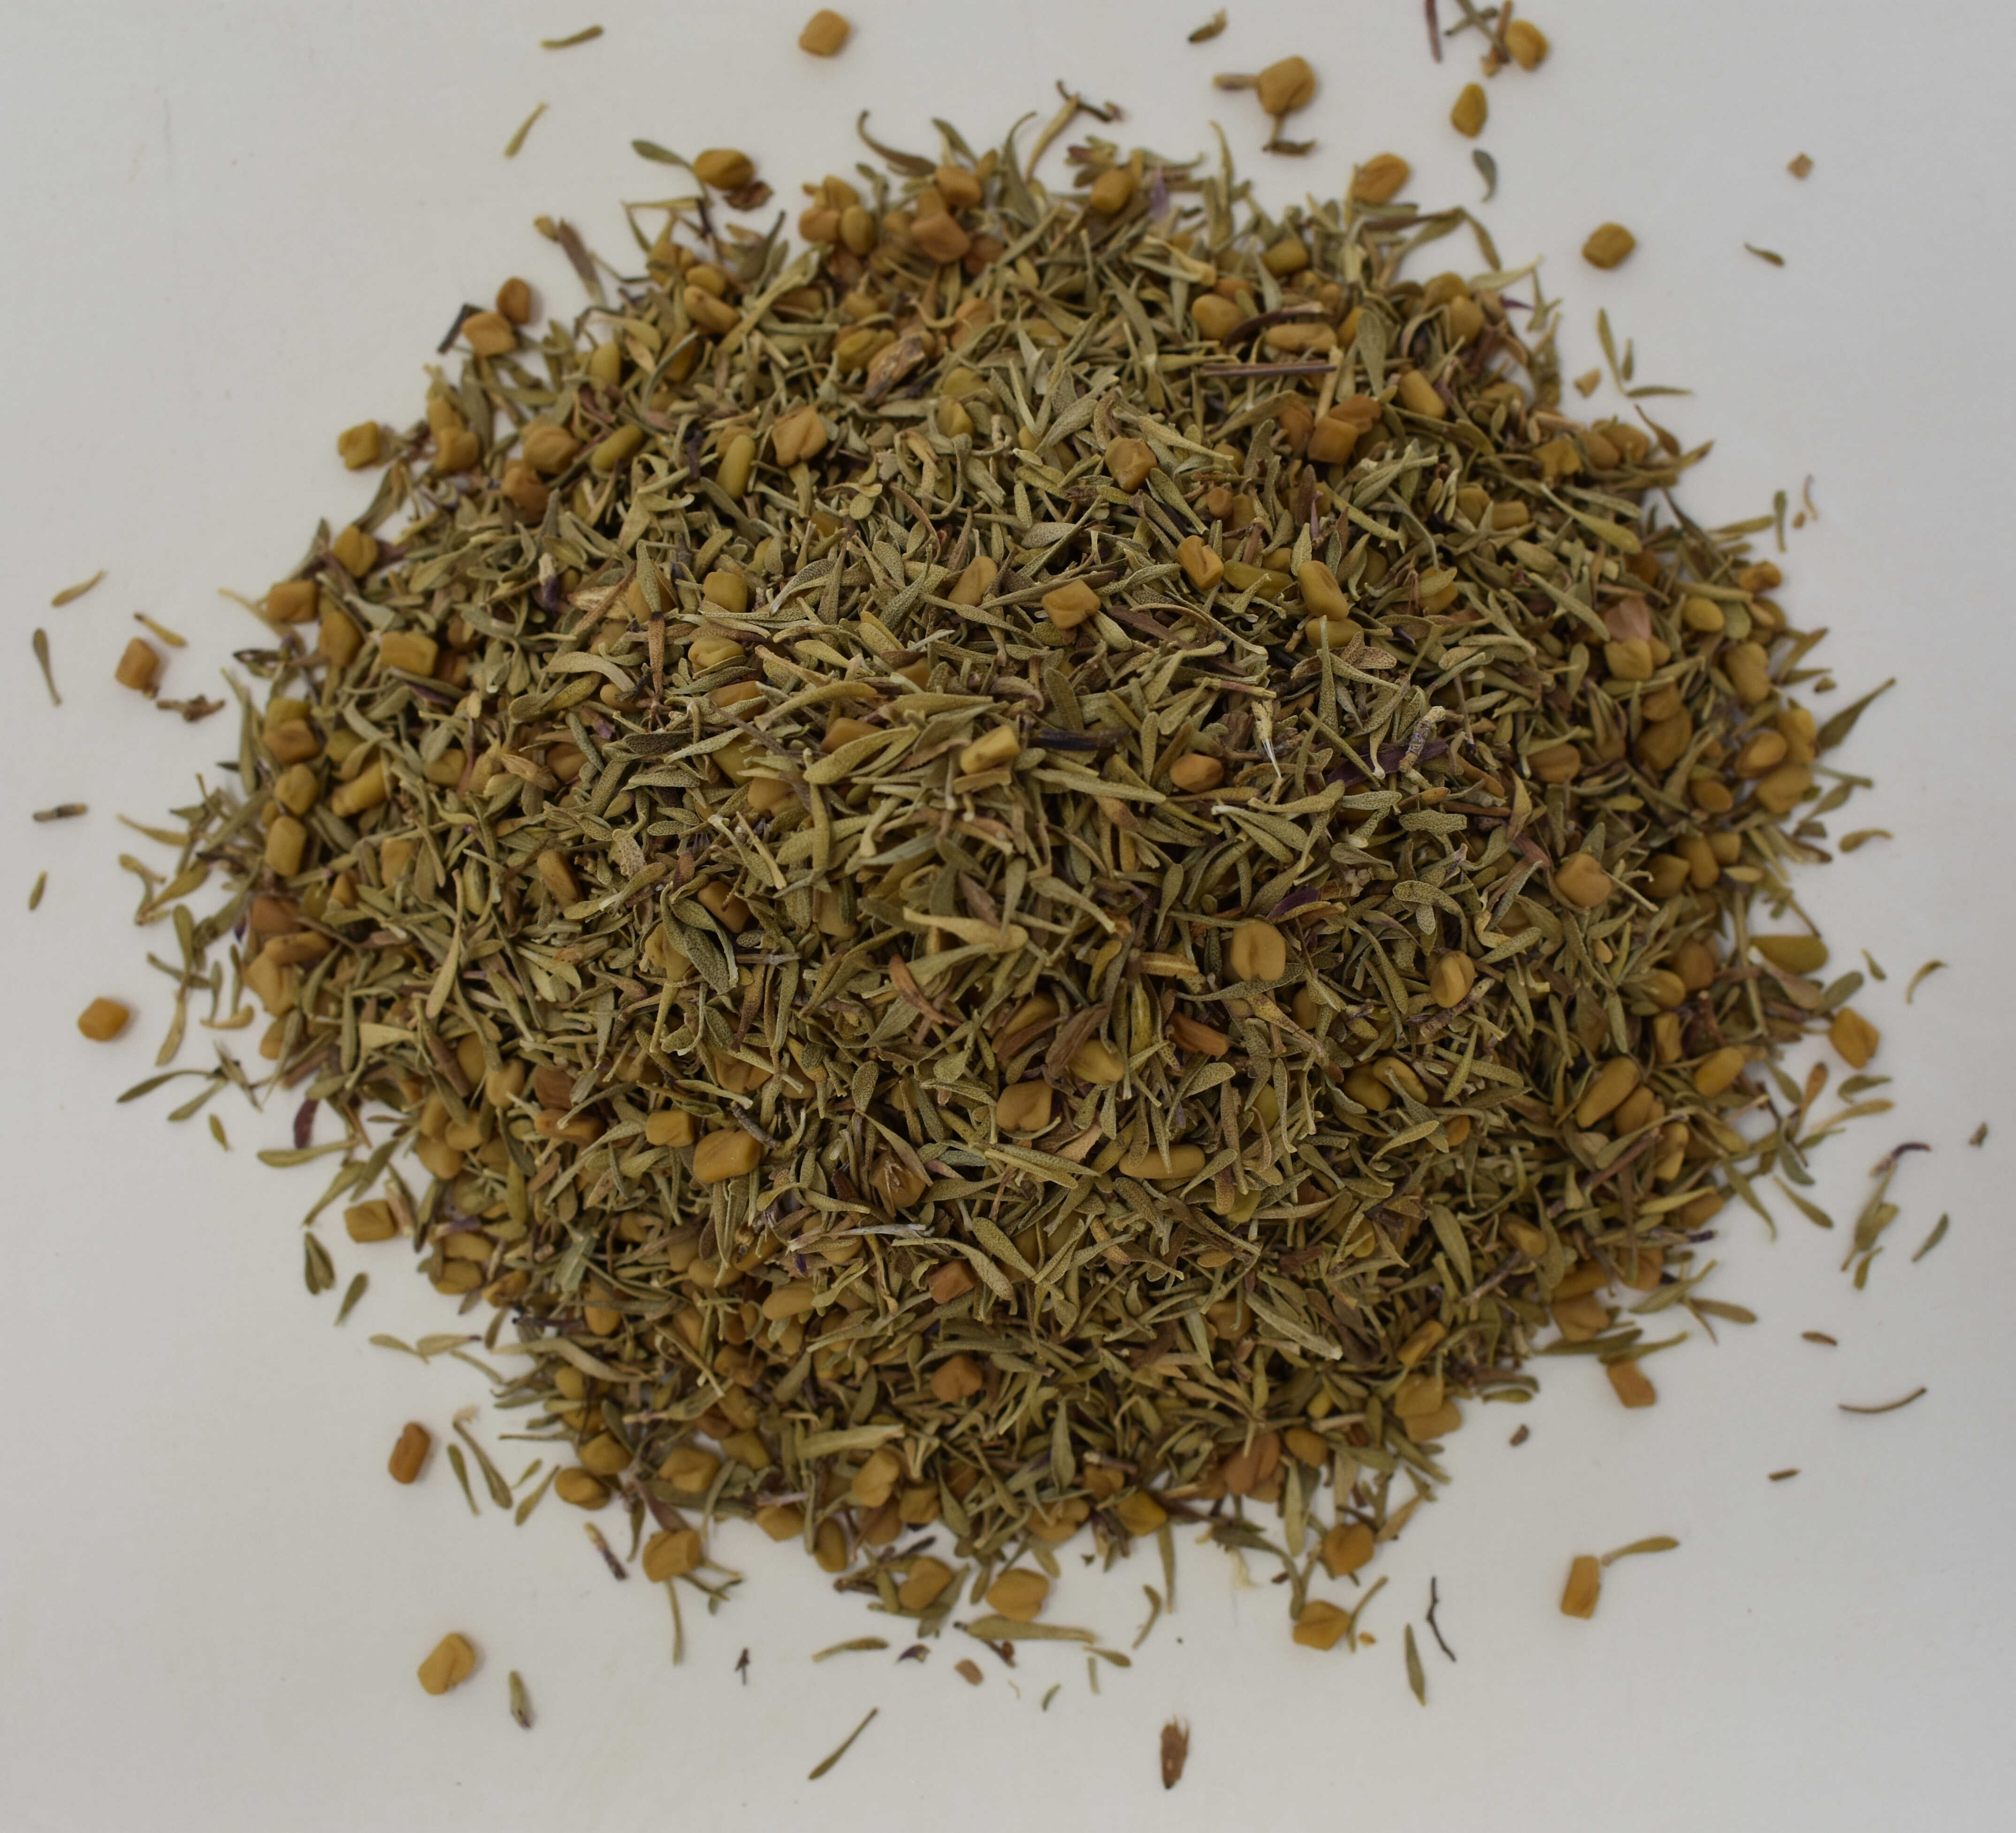 Fenugreek and Thyme - Top Photo